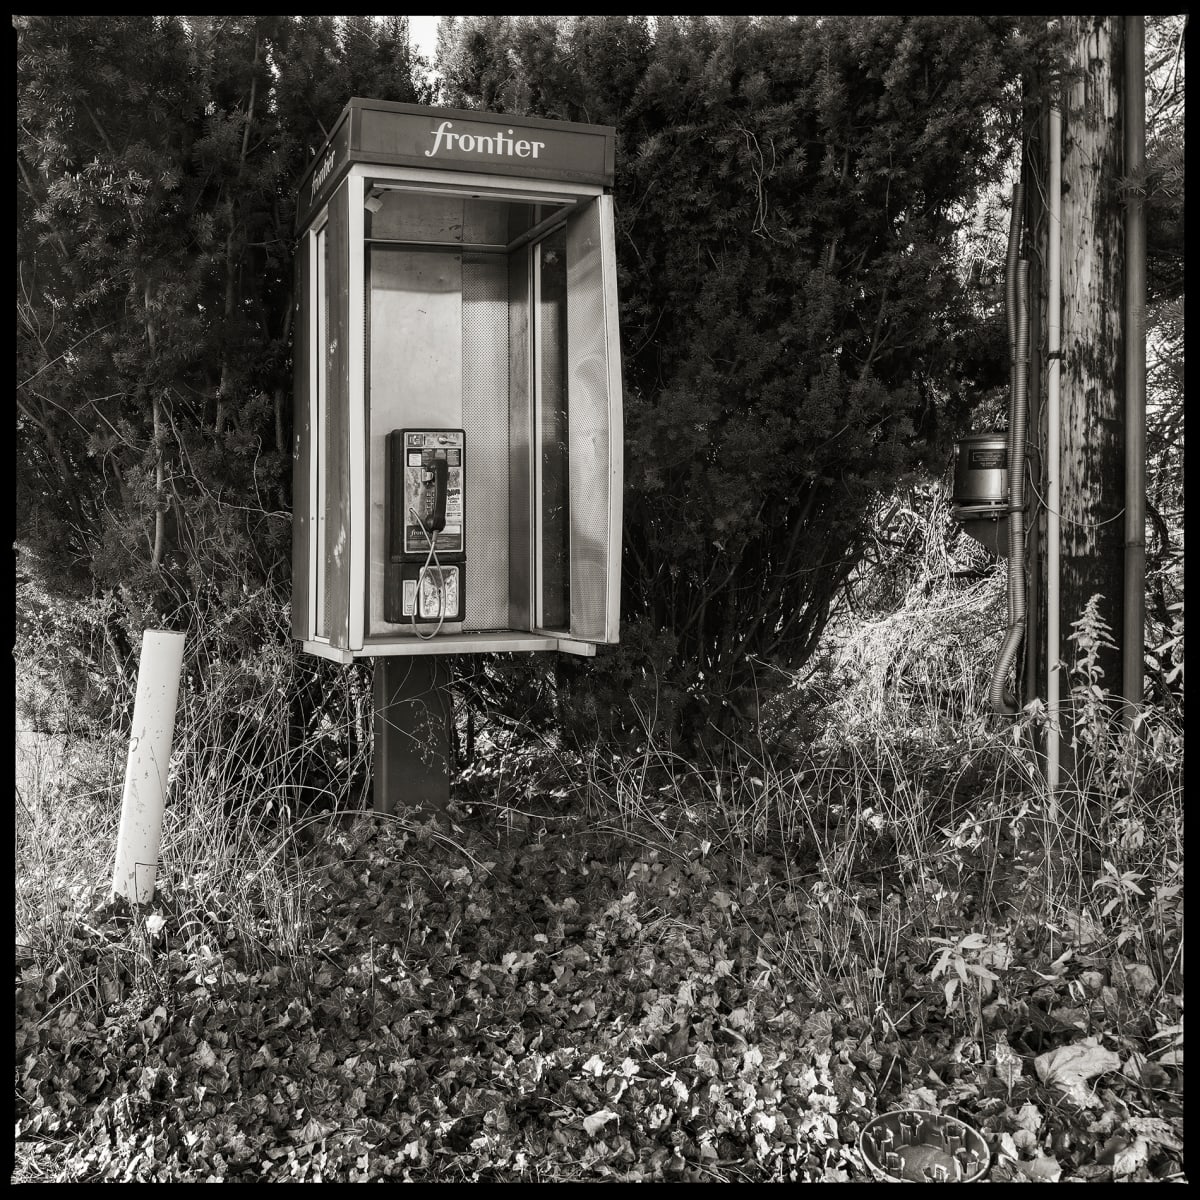 585.671.9814 – Bay Ridge Mobil, 420 Ridge Road, Webster, NY 14580 by Eric T. Kunsman  Image: ID: A black and white image shows a Frontier payphone standing amongst bushes and shrubbery.